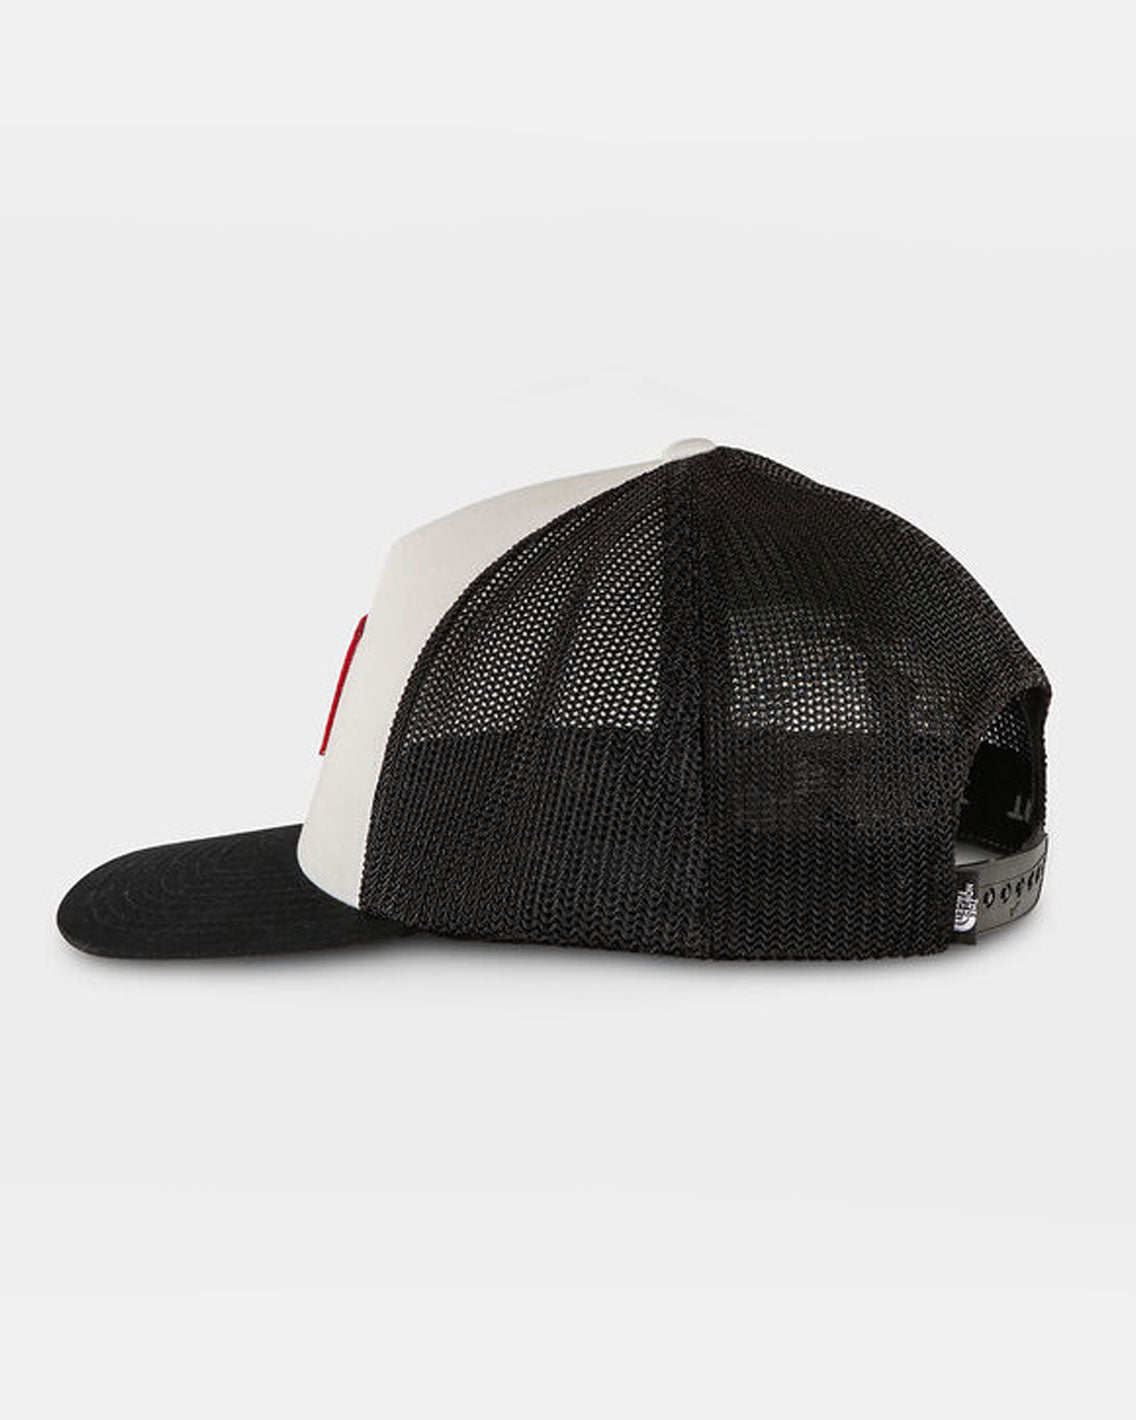 The North Face - Keep It Patched Trucker Hat - Blk / Horizon Red / Wht